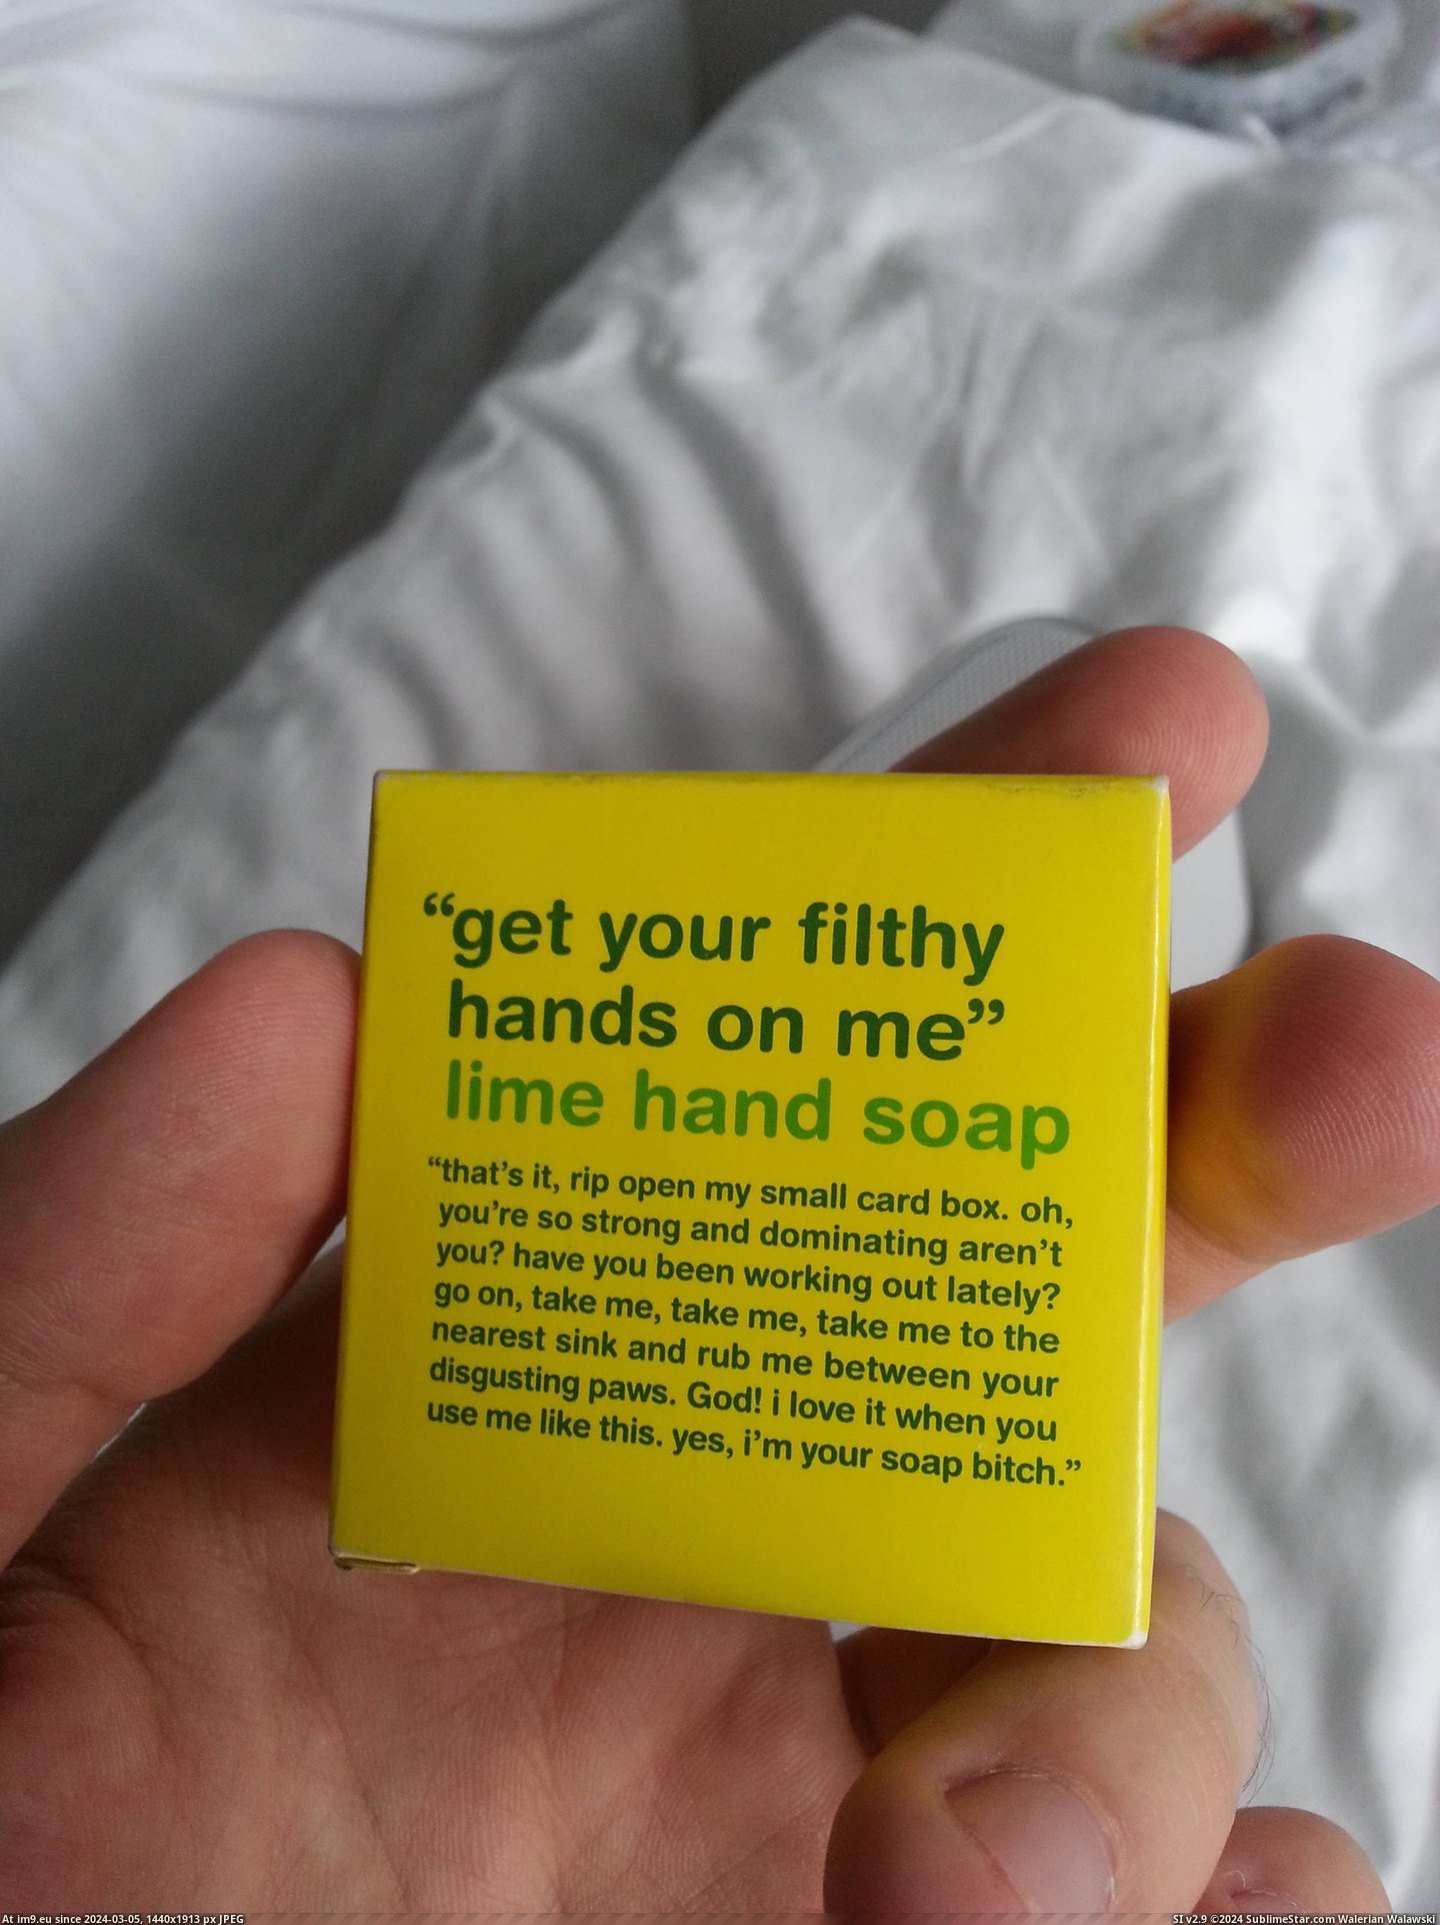 #Funny #Soap #Amsterdam #Horny [Funny] Even the soap is horny in Amsterdam Pic. (Bild von album My r/FUNNY favs))